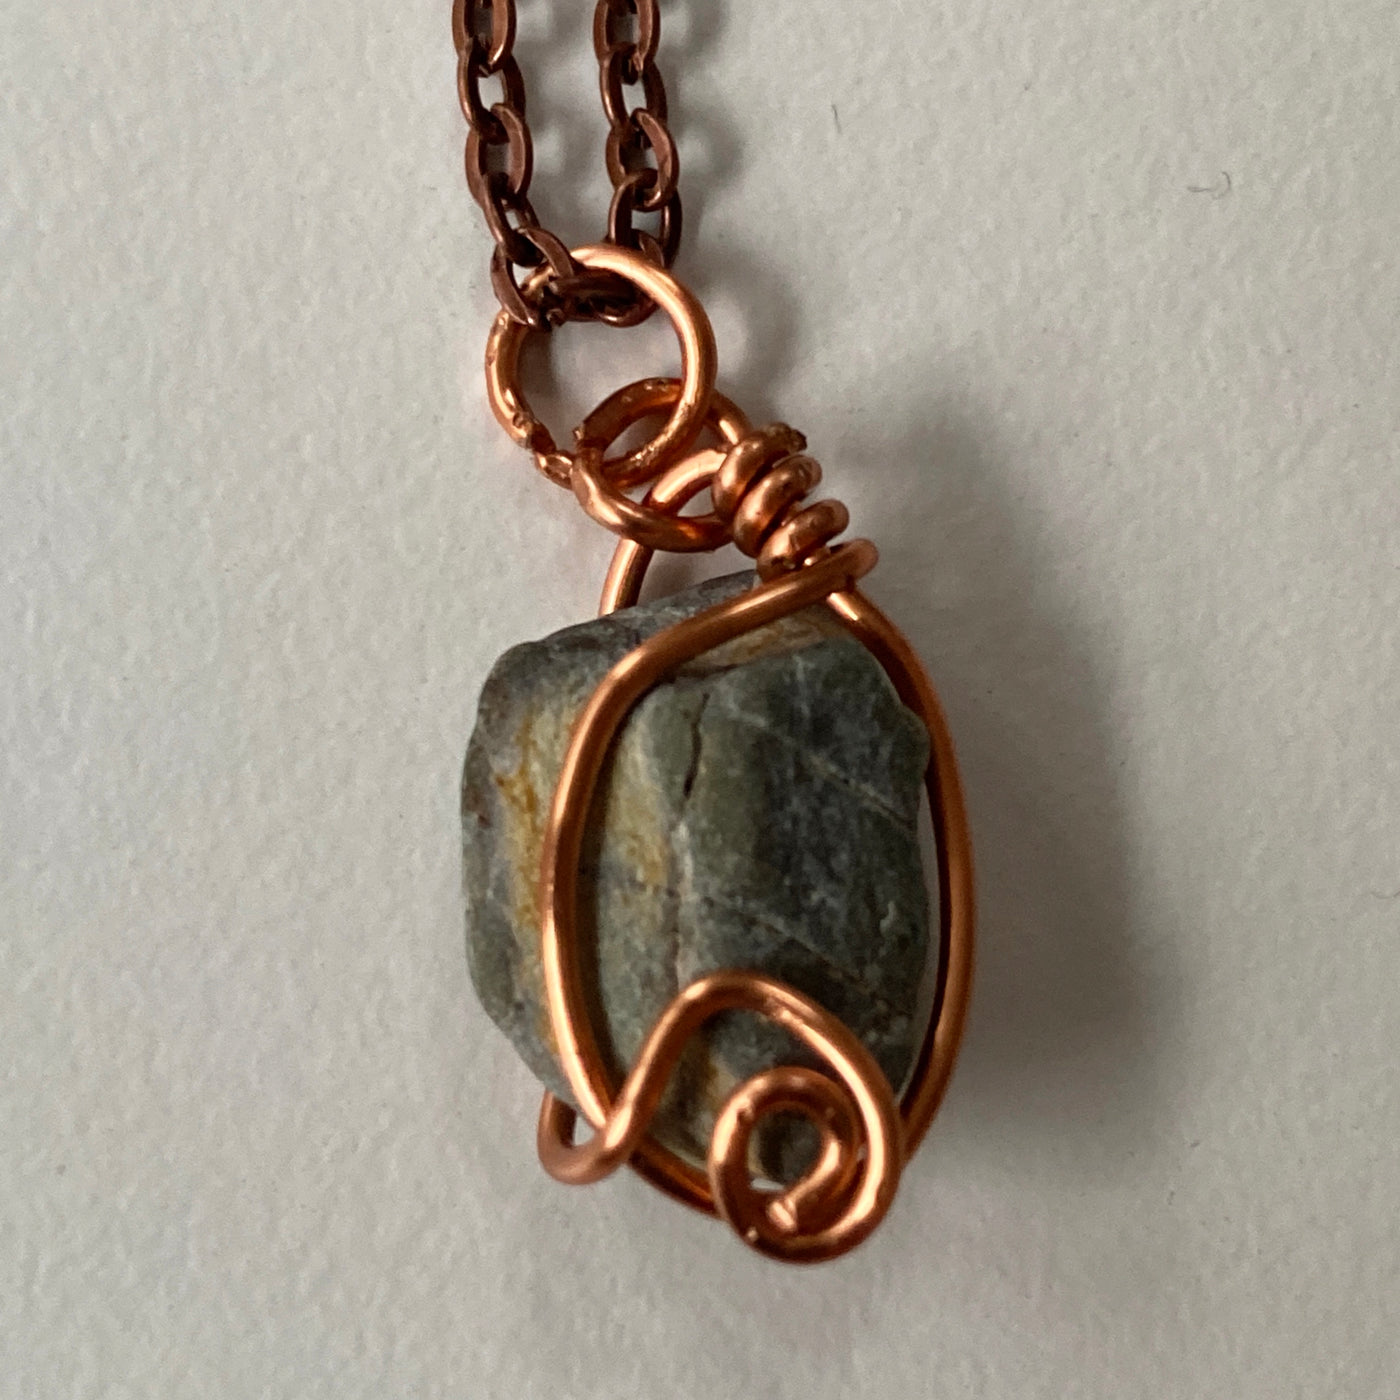 Small pendant. Grey natural stone and wire. Elbastones collection.